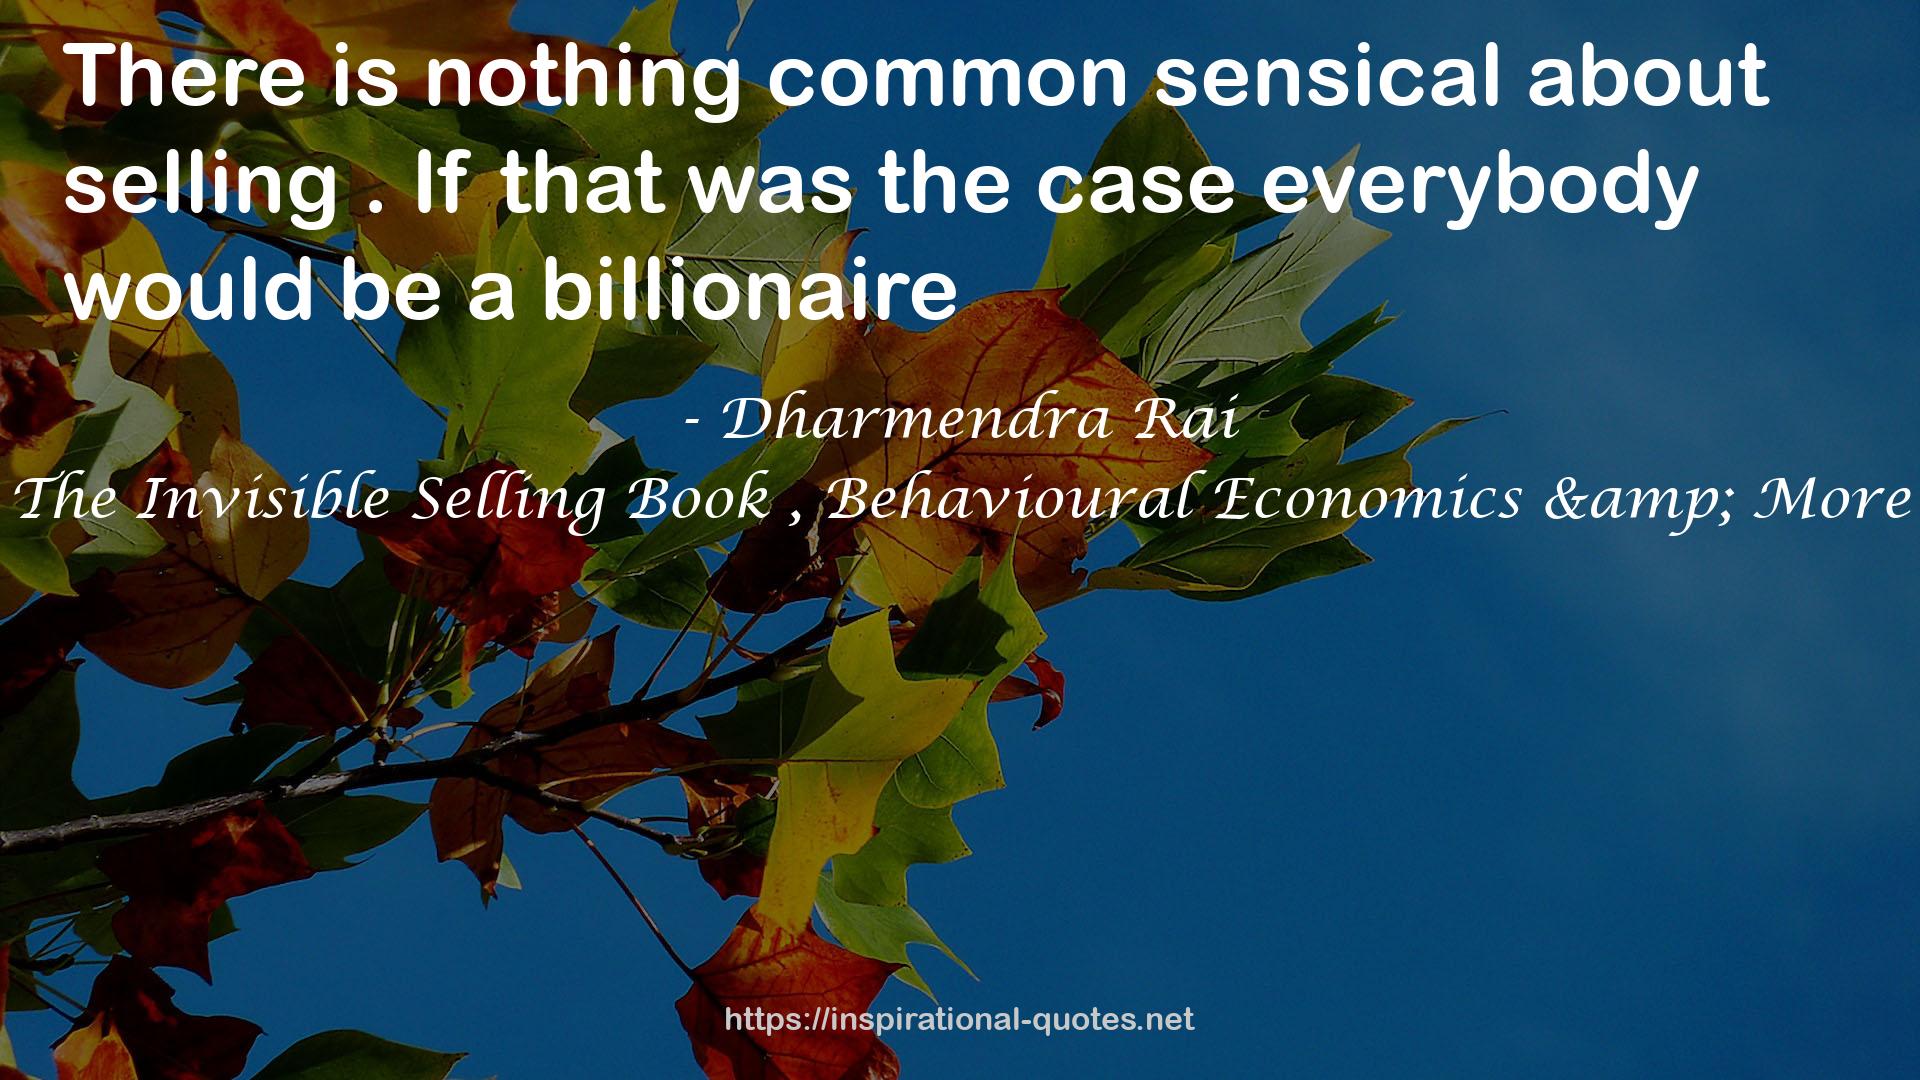 The Invisible Selling Book , Behavioural Economics & More QUOTES